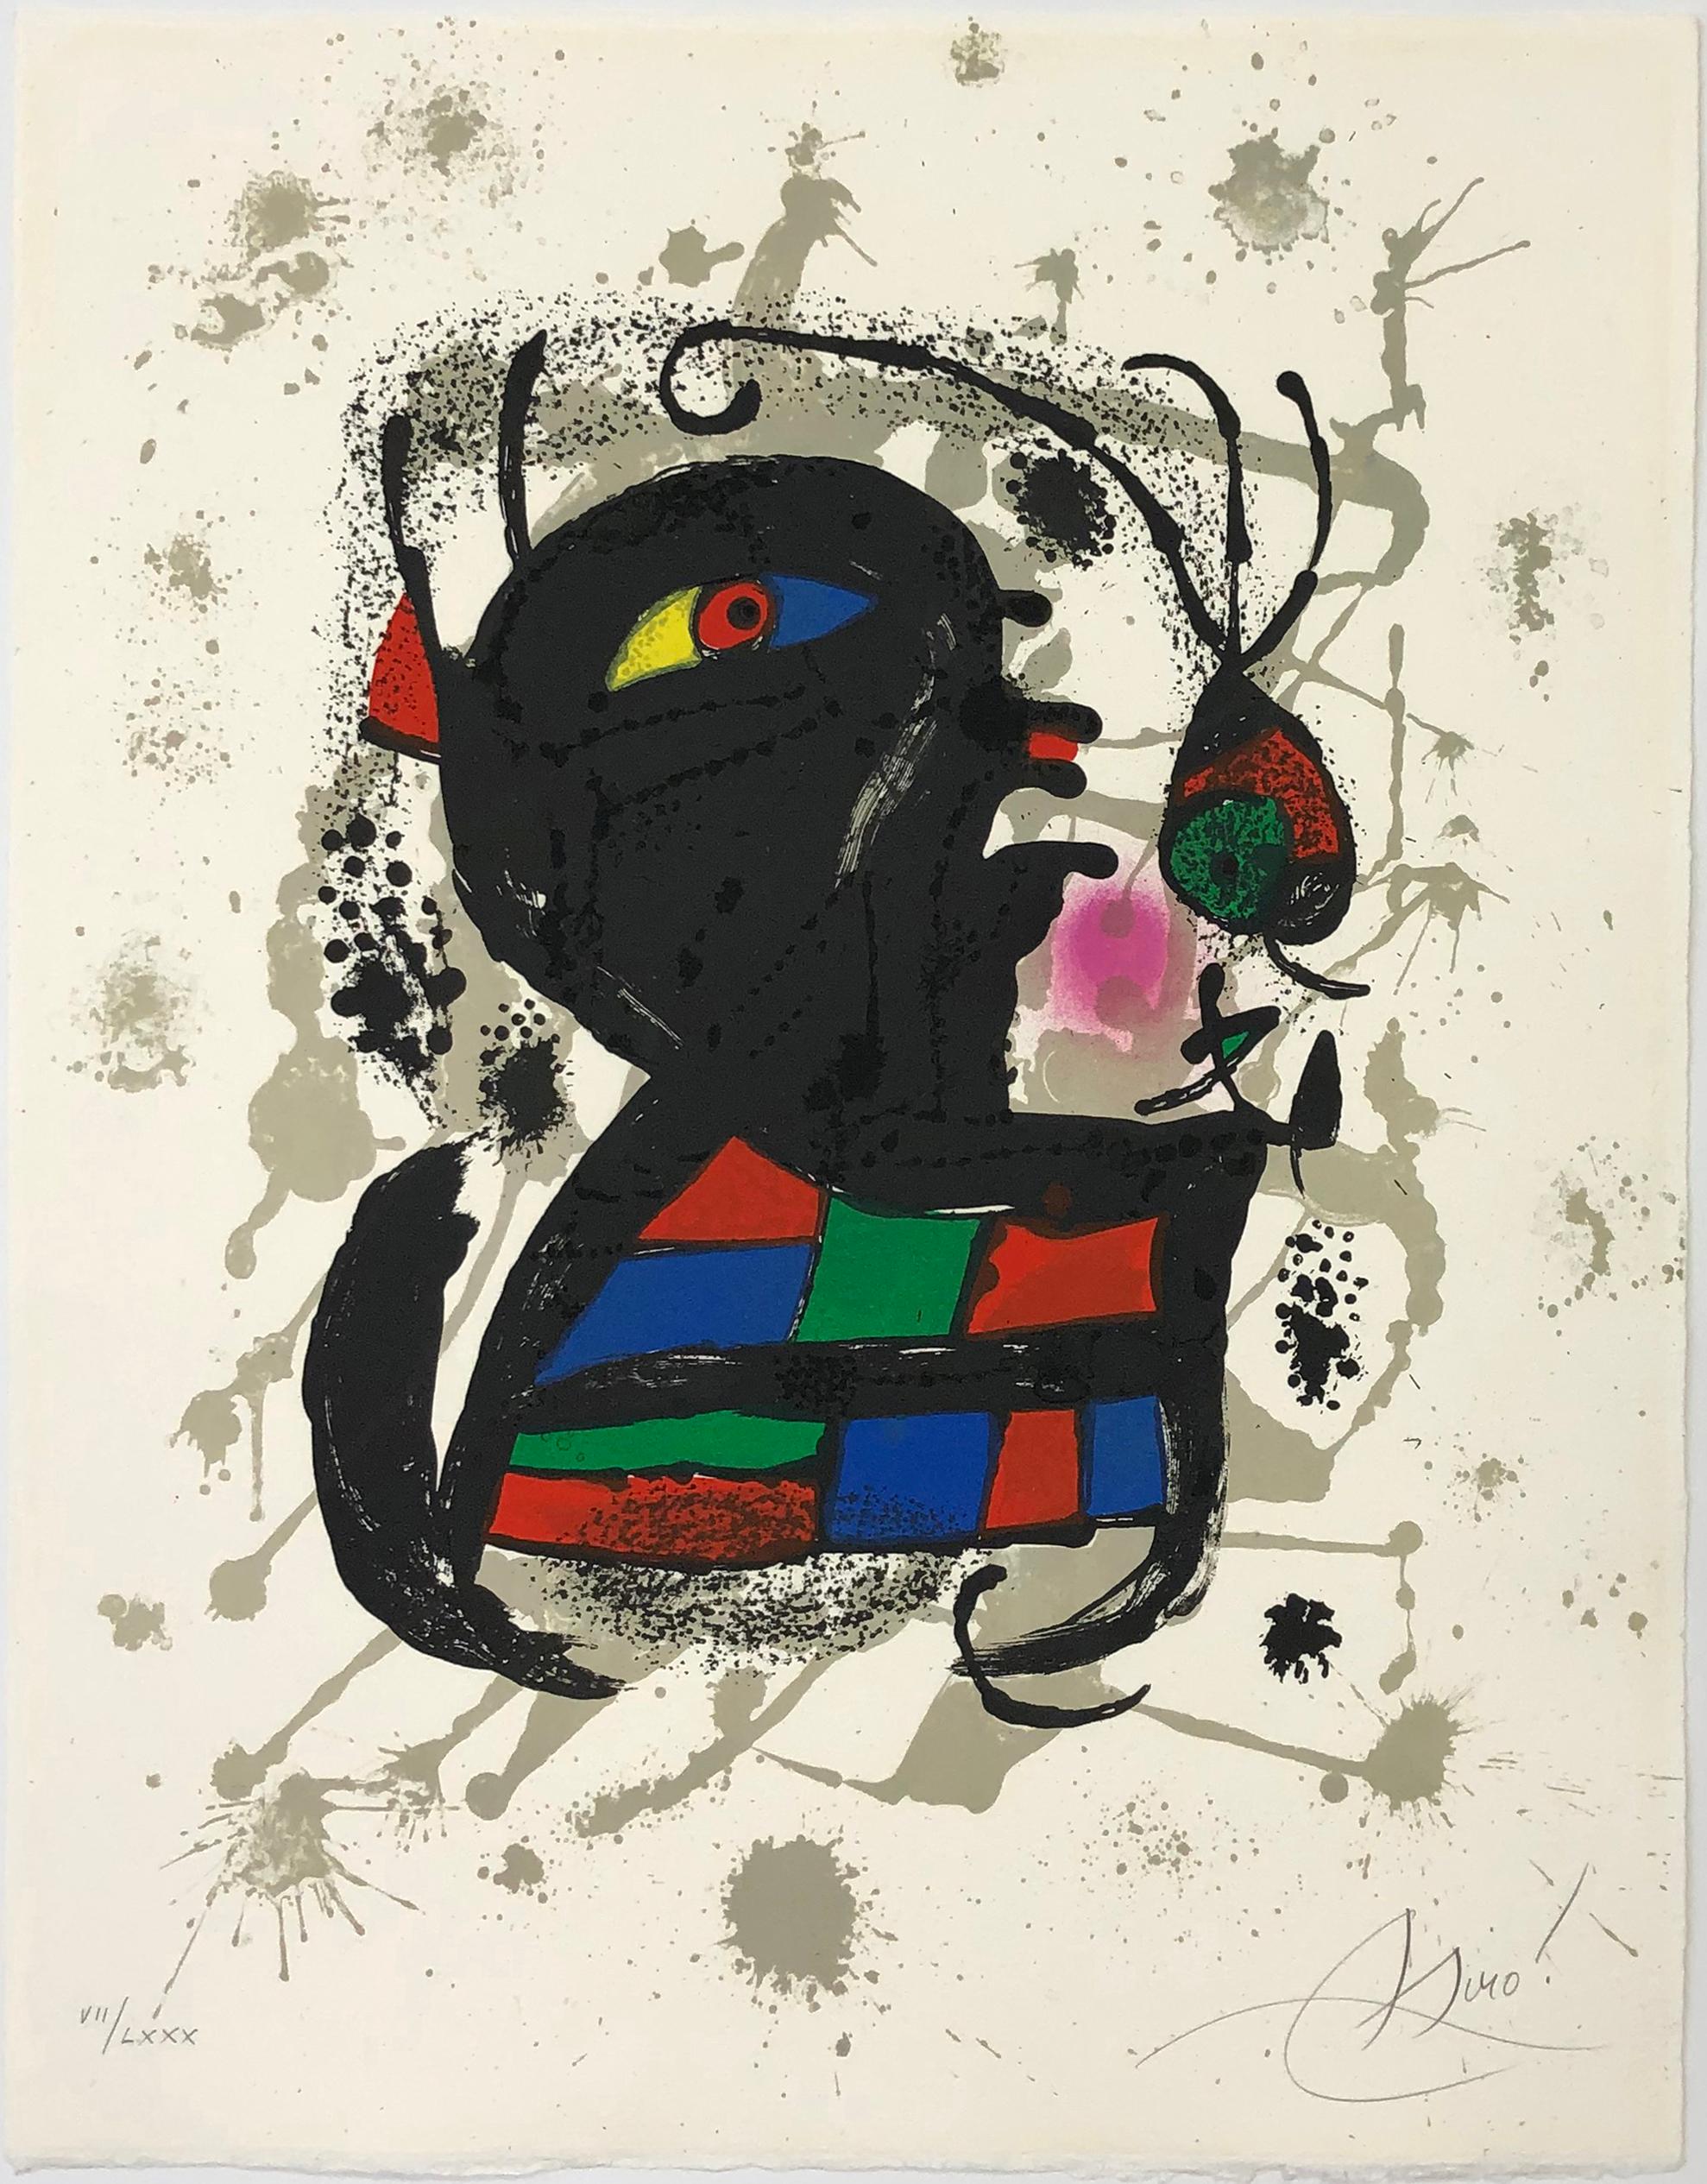 LITHOGRAPHE III (8 SIGNED PRINTS) - Surrealist Print by Joan Miró